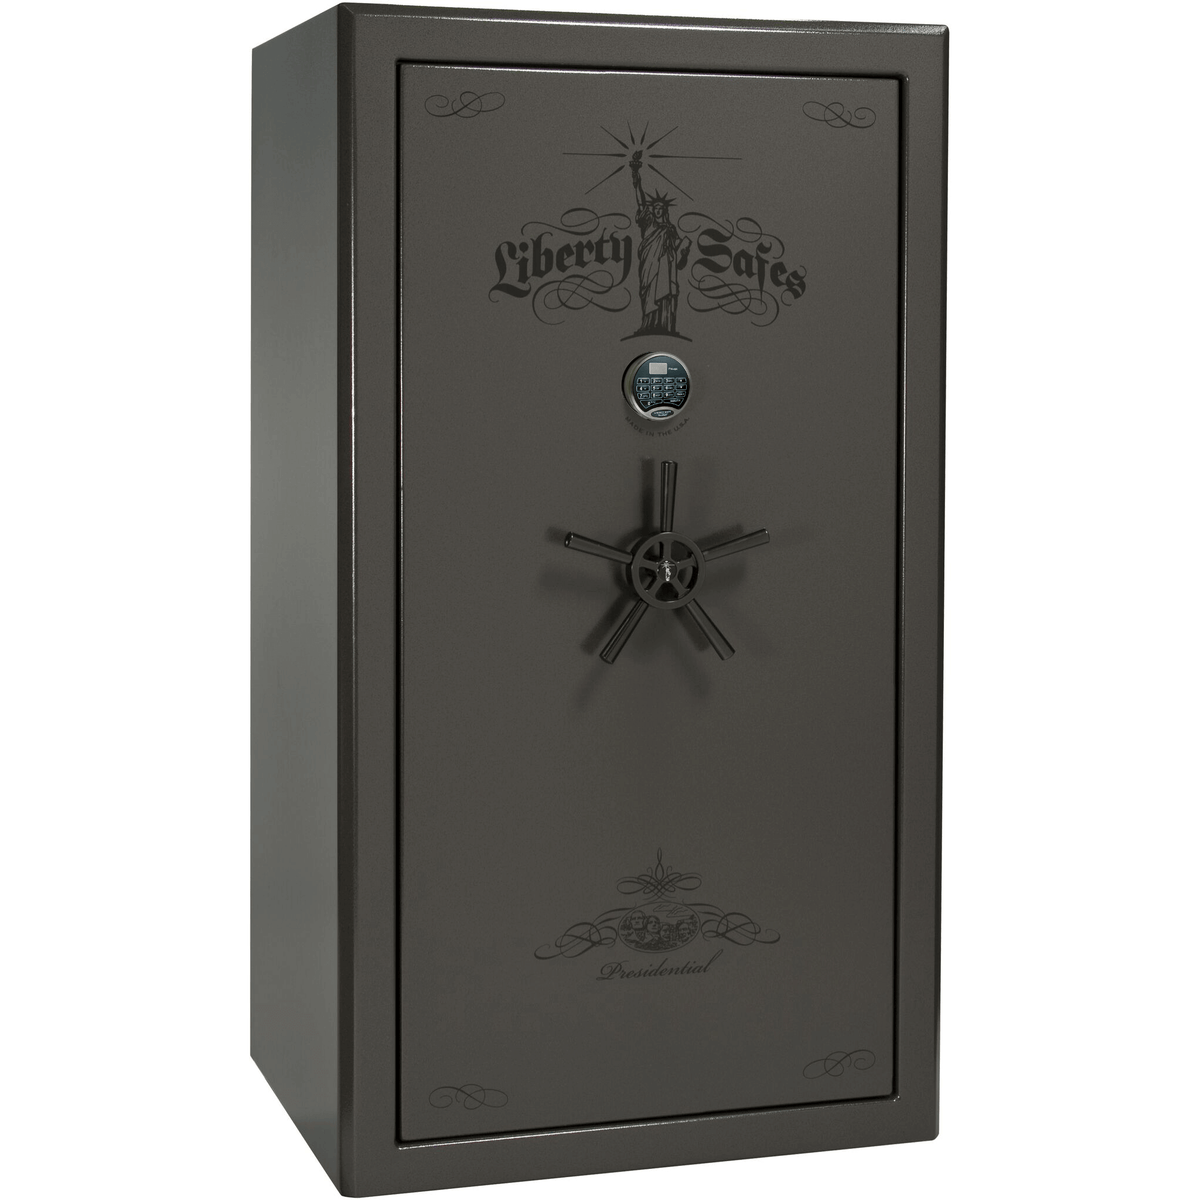 Liberty Safe Presidential 40 in Gray Marble with Black Chrome Electronic Lock, closed door.